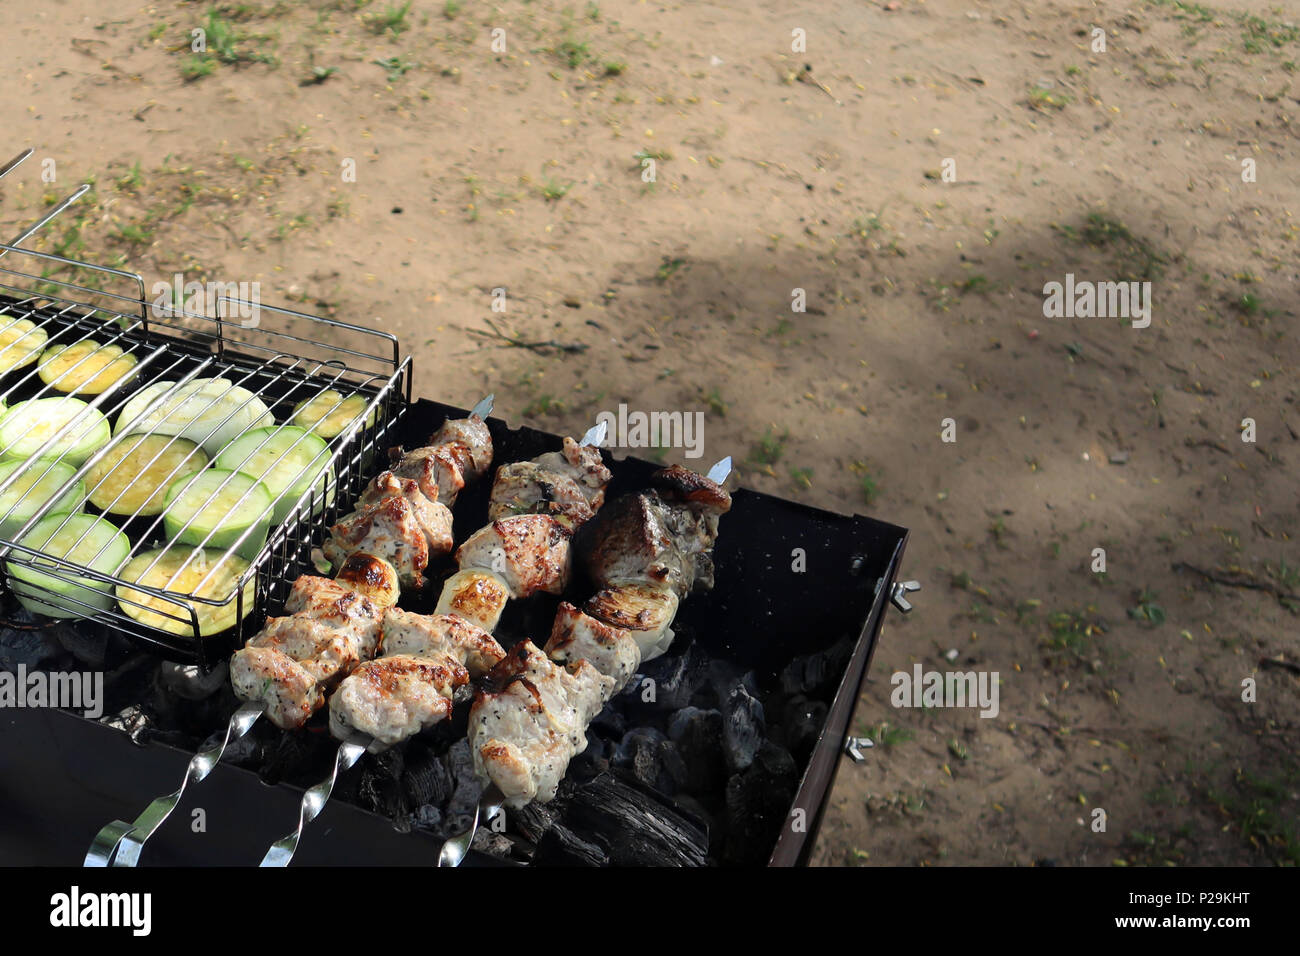 Appetizing grilled meat and vegetables roasting on the old grill outdoors Stock Photo